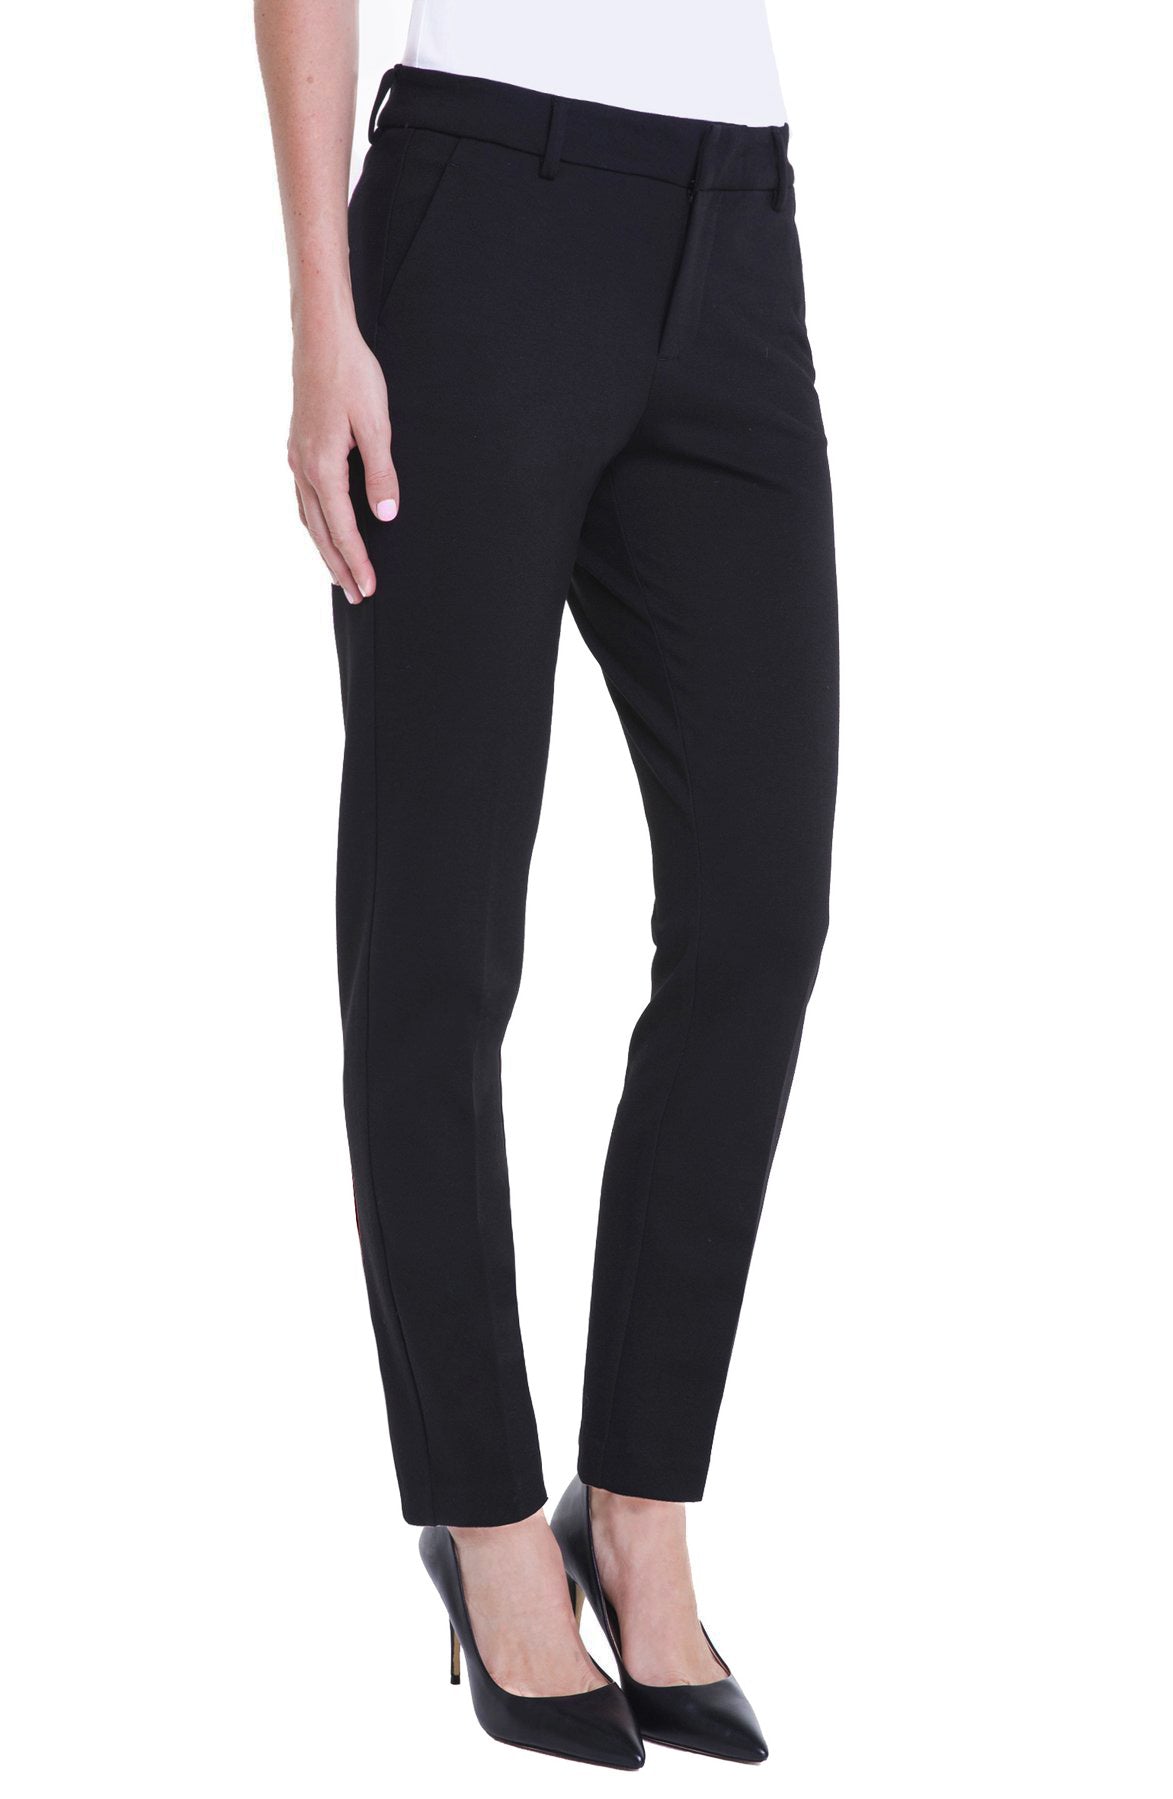 KELSEY KNIT TROUSER SUPER STRETCH - LONG – LIVERPOOL LOS ANGELES